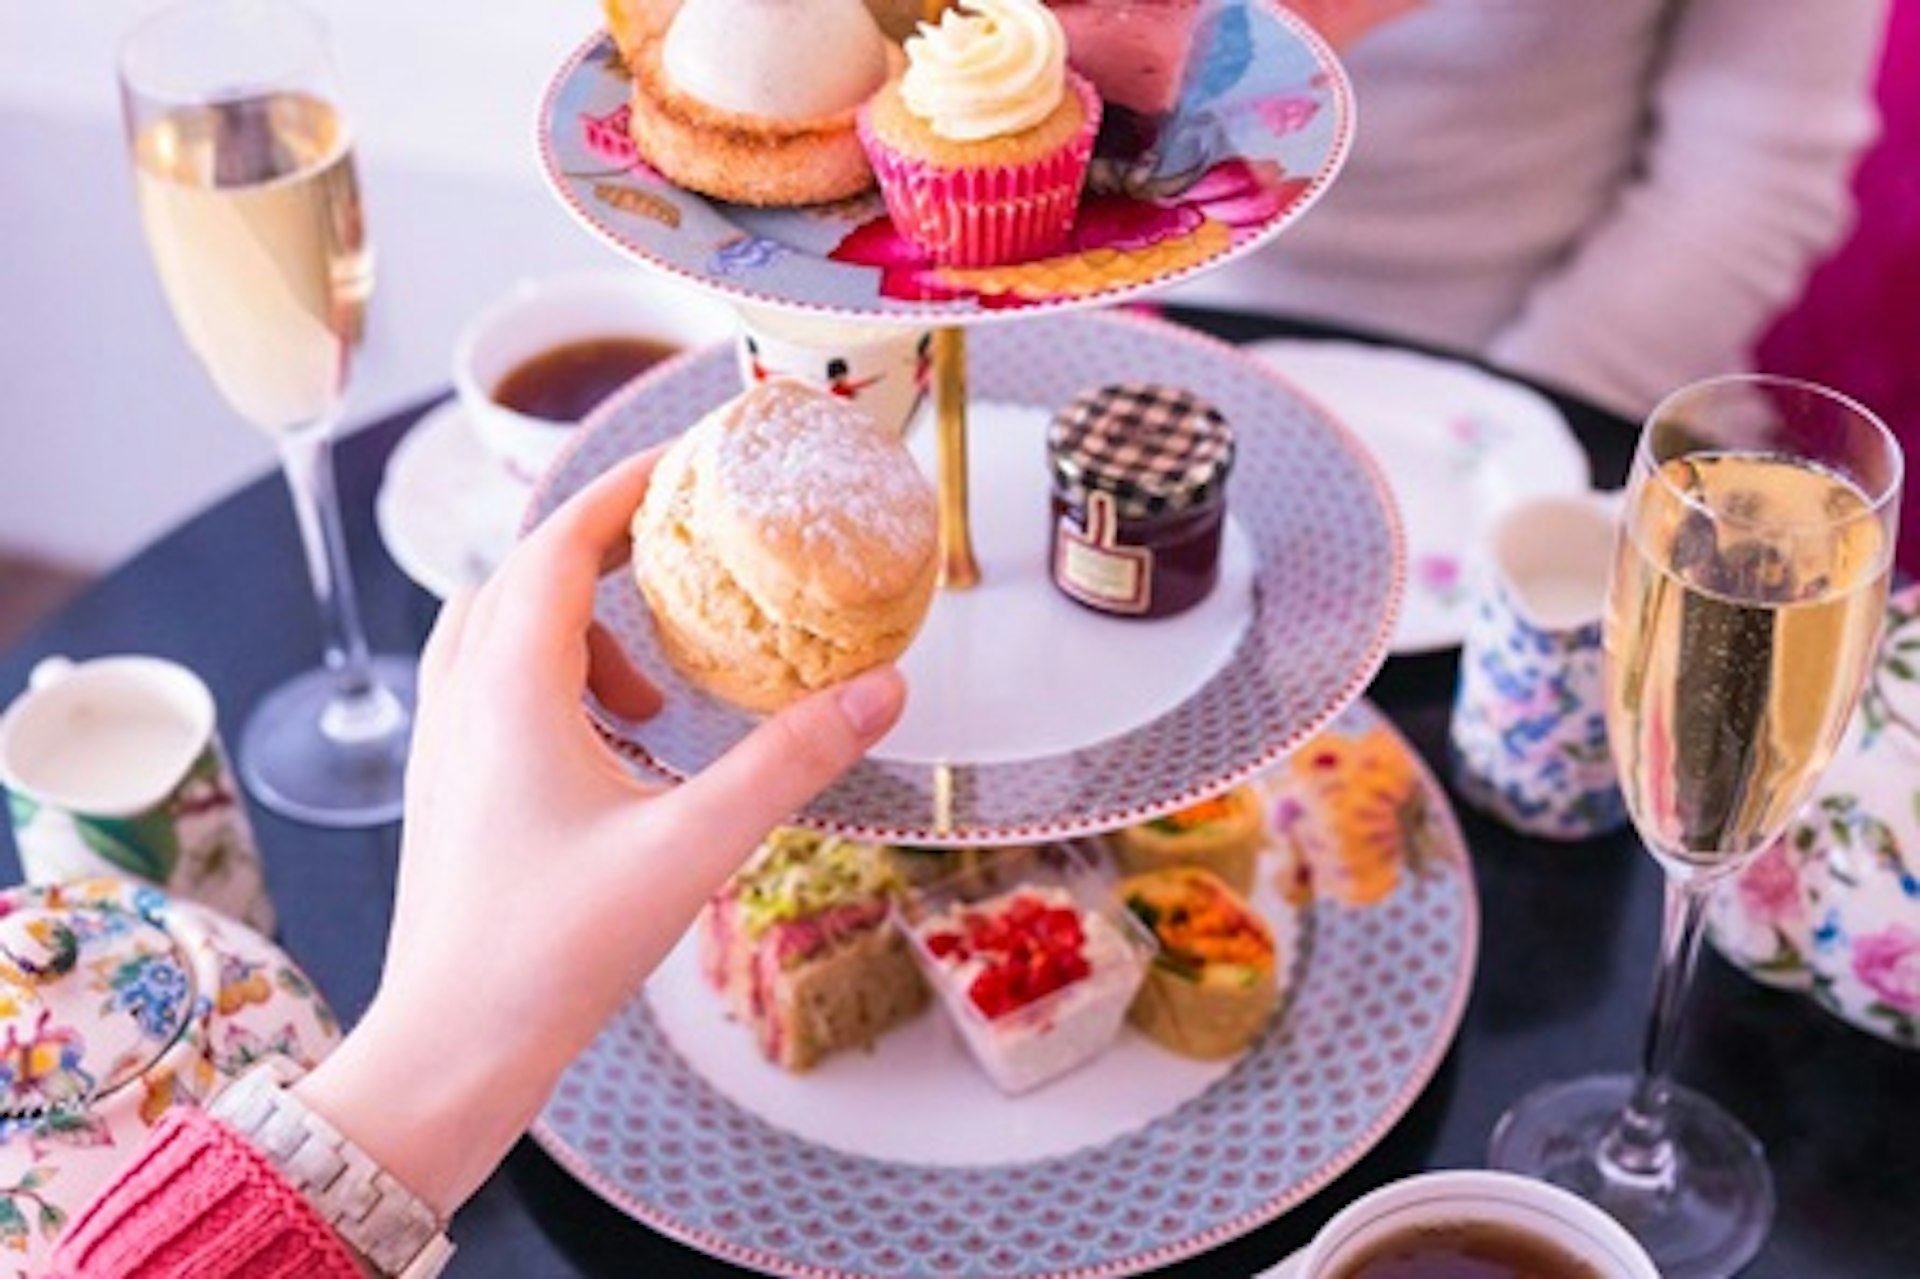 Bottomless Gin Cocktail Afternoon Tea for Two at Brigit's Bakery Covent Garden 2